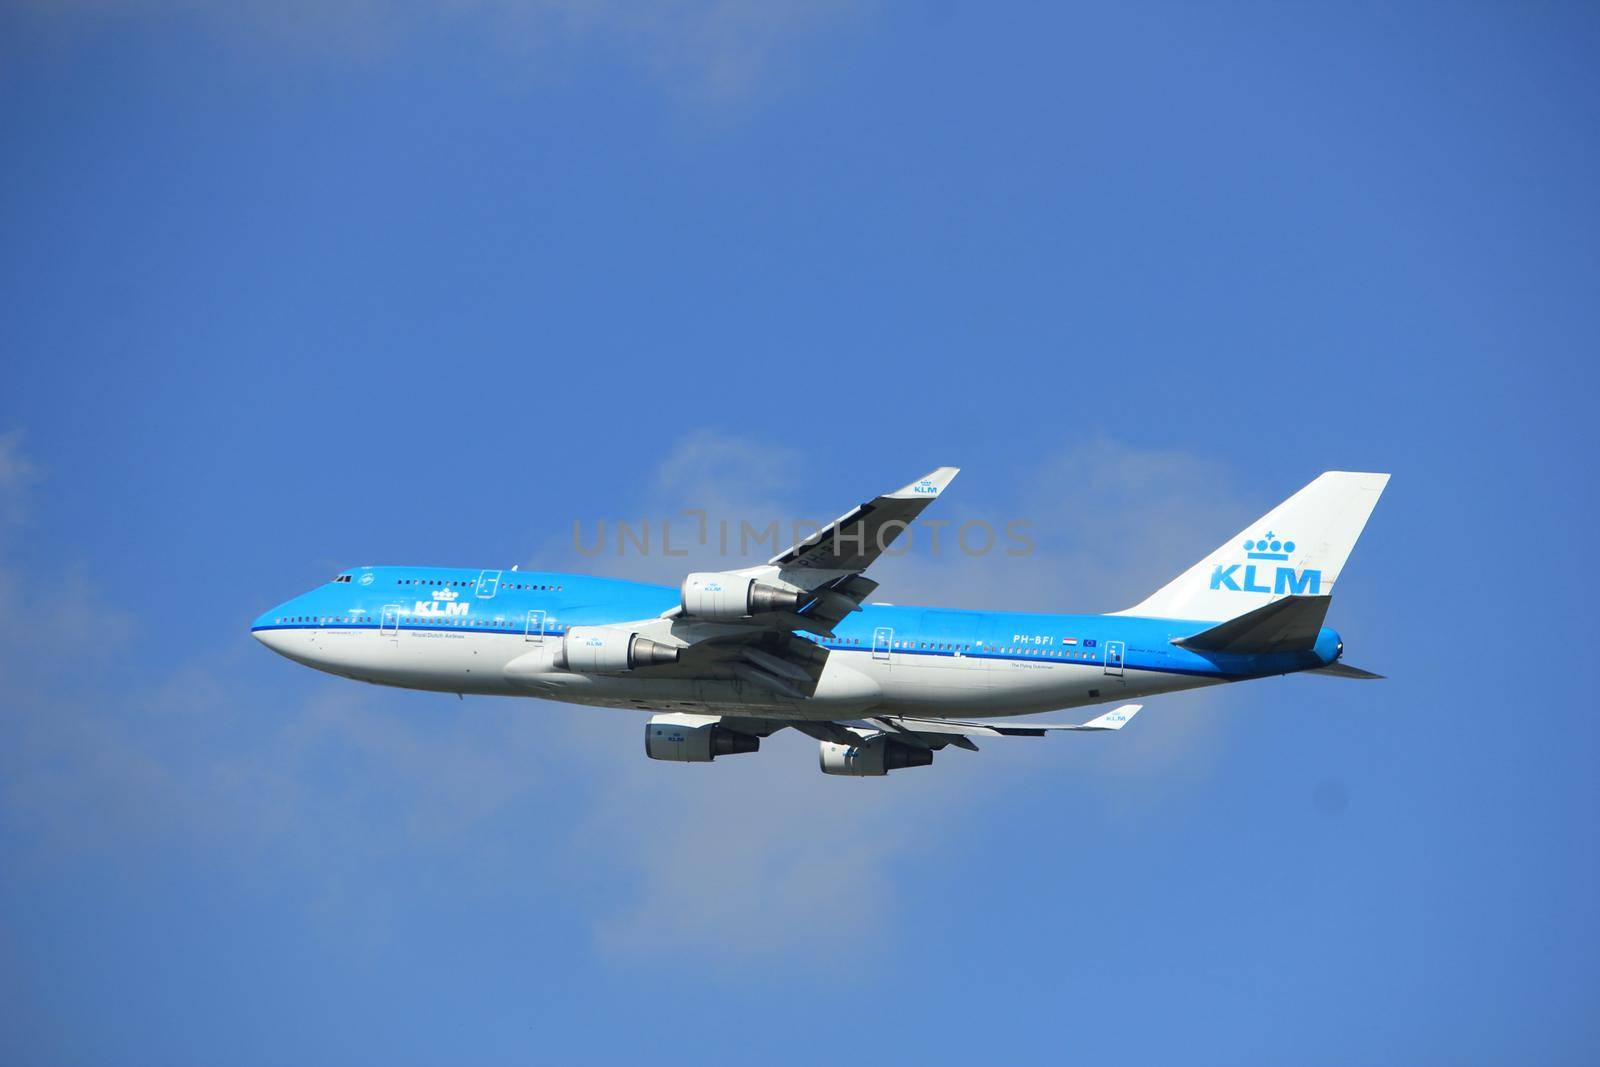 Amsterdam the Netherlands - September 23rd 2017: PH-BFI KLM Royal Dutch Airlines Boeing 747 takeoff from Kaagbaan runway, Amsterdam Airport Schiphol